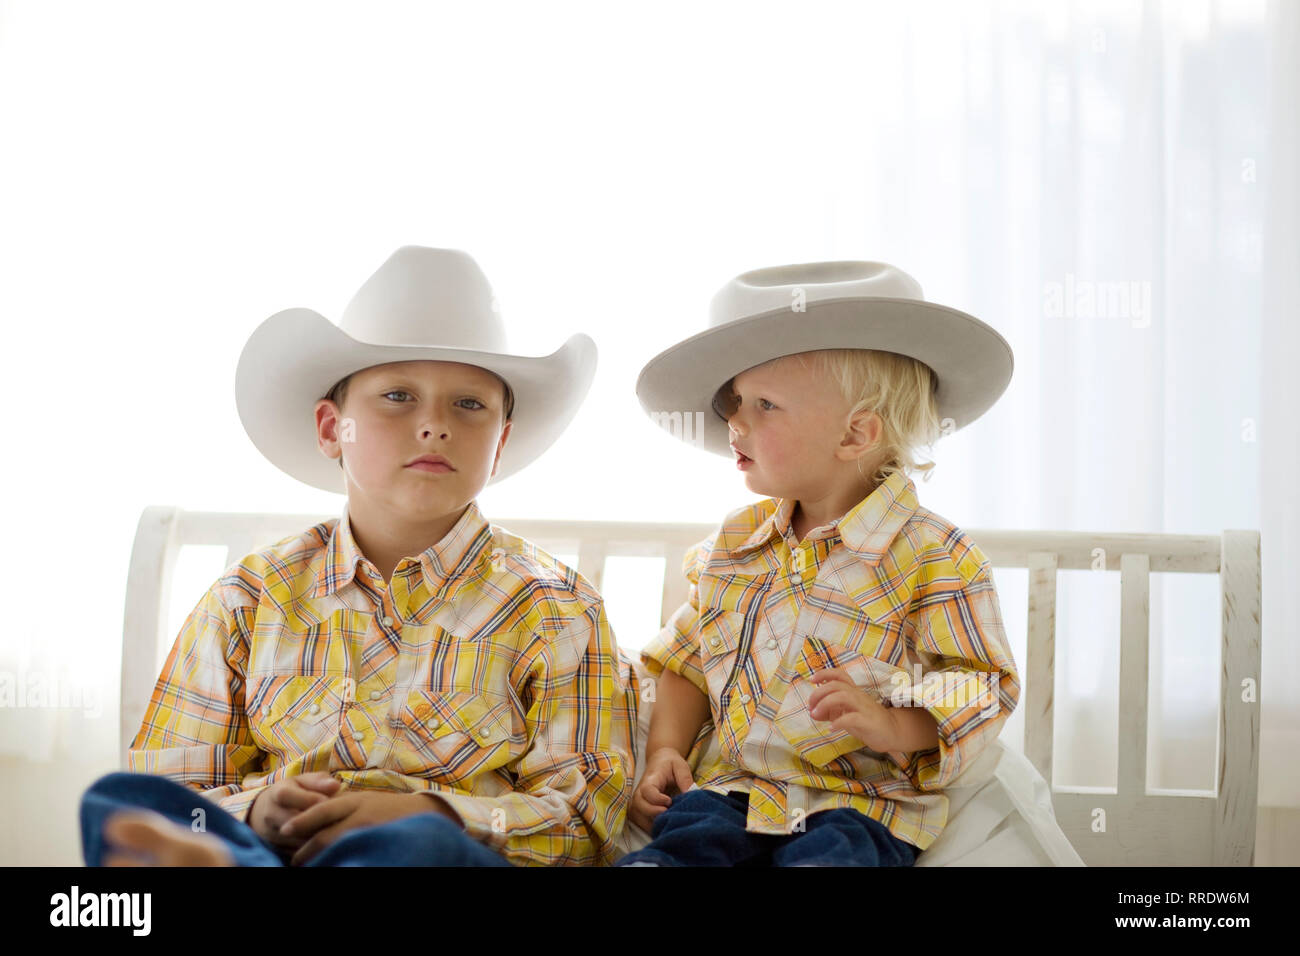 Portrait of a boy wearing a cowboy hat while sitting next to his younger brother. Stock Photo